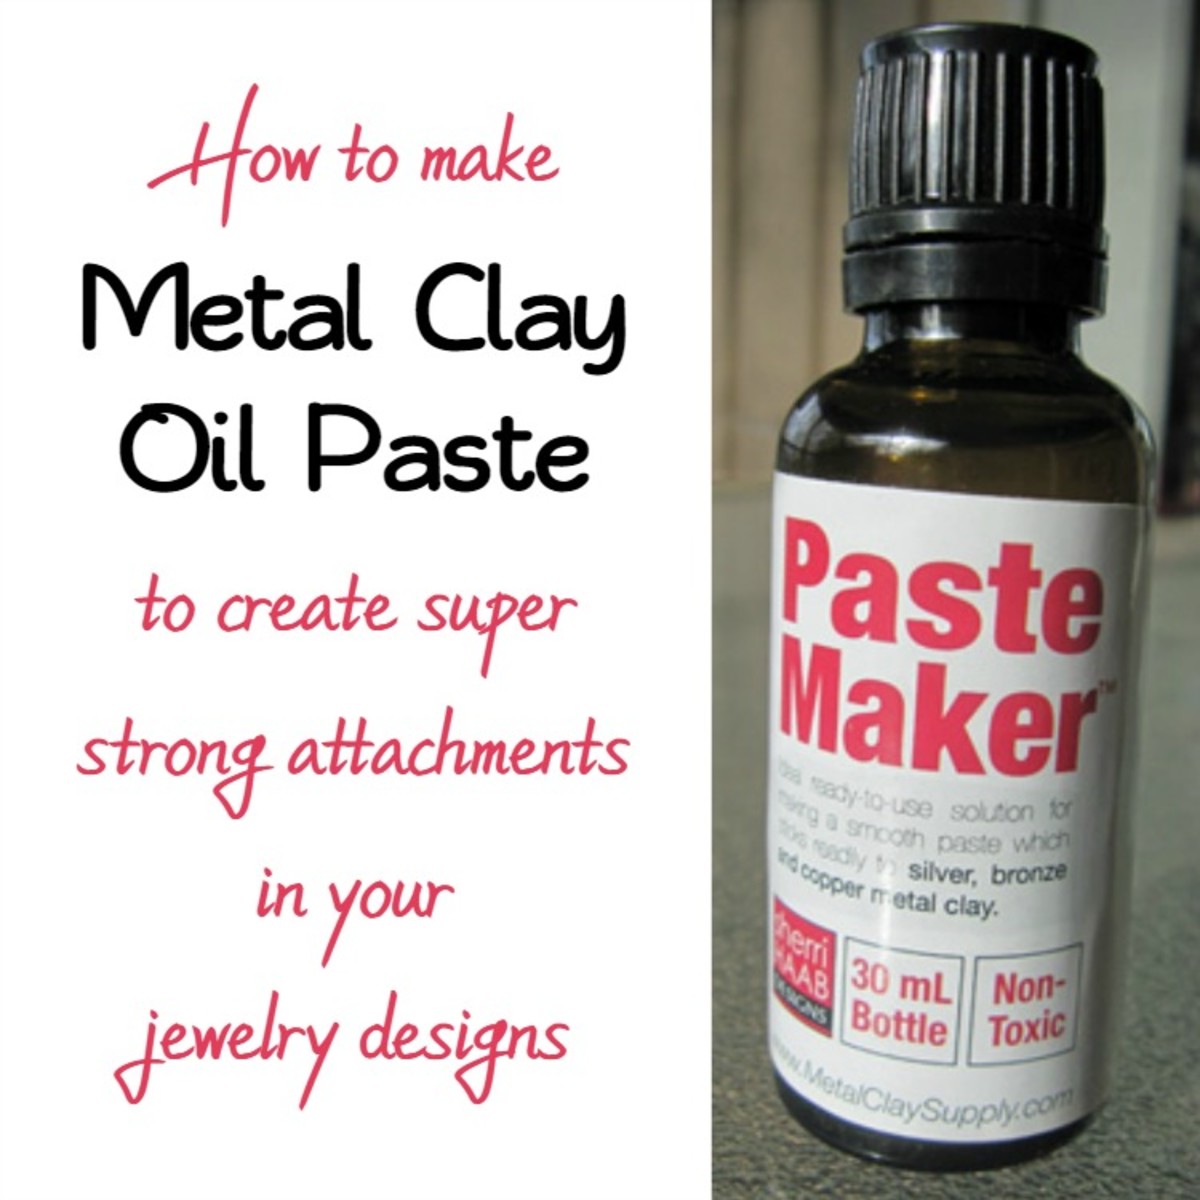 How to Make Metal Clay Oil Paste